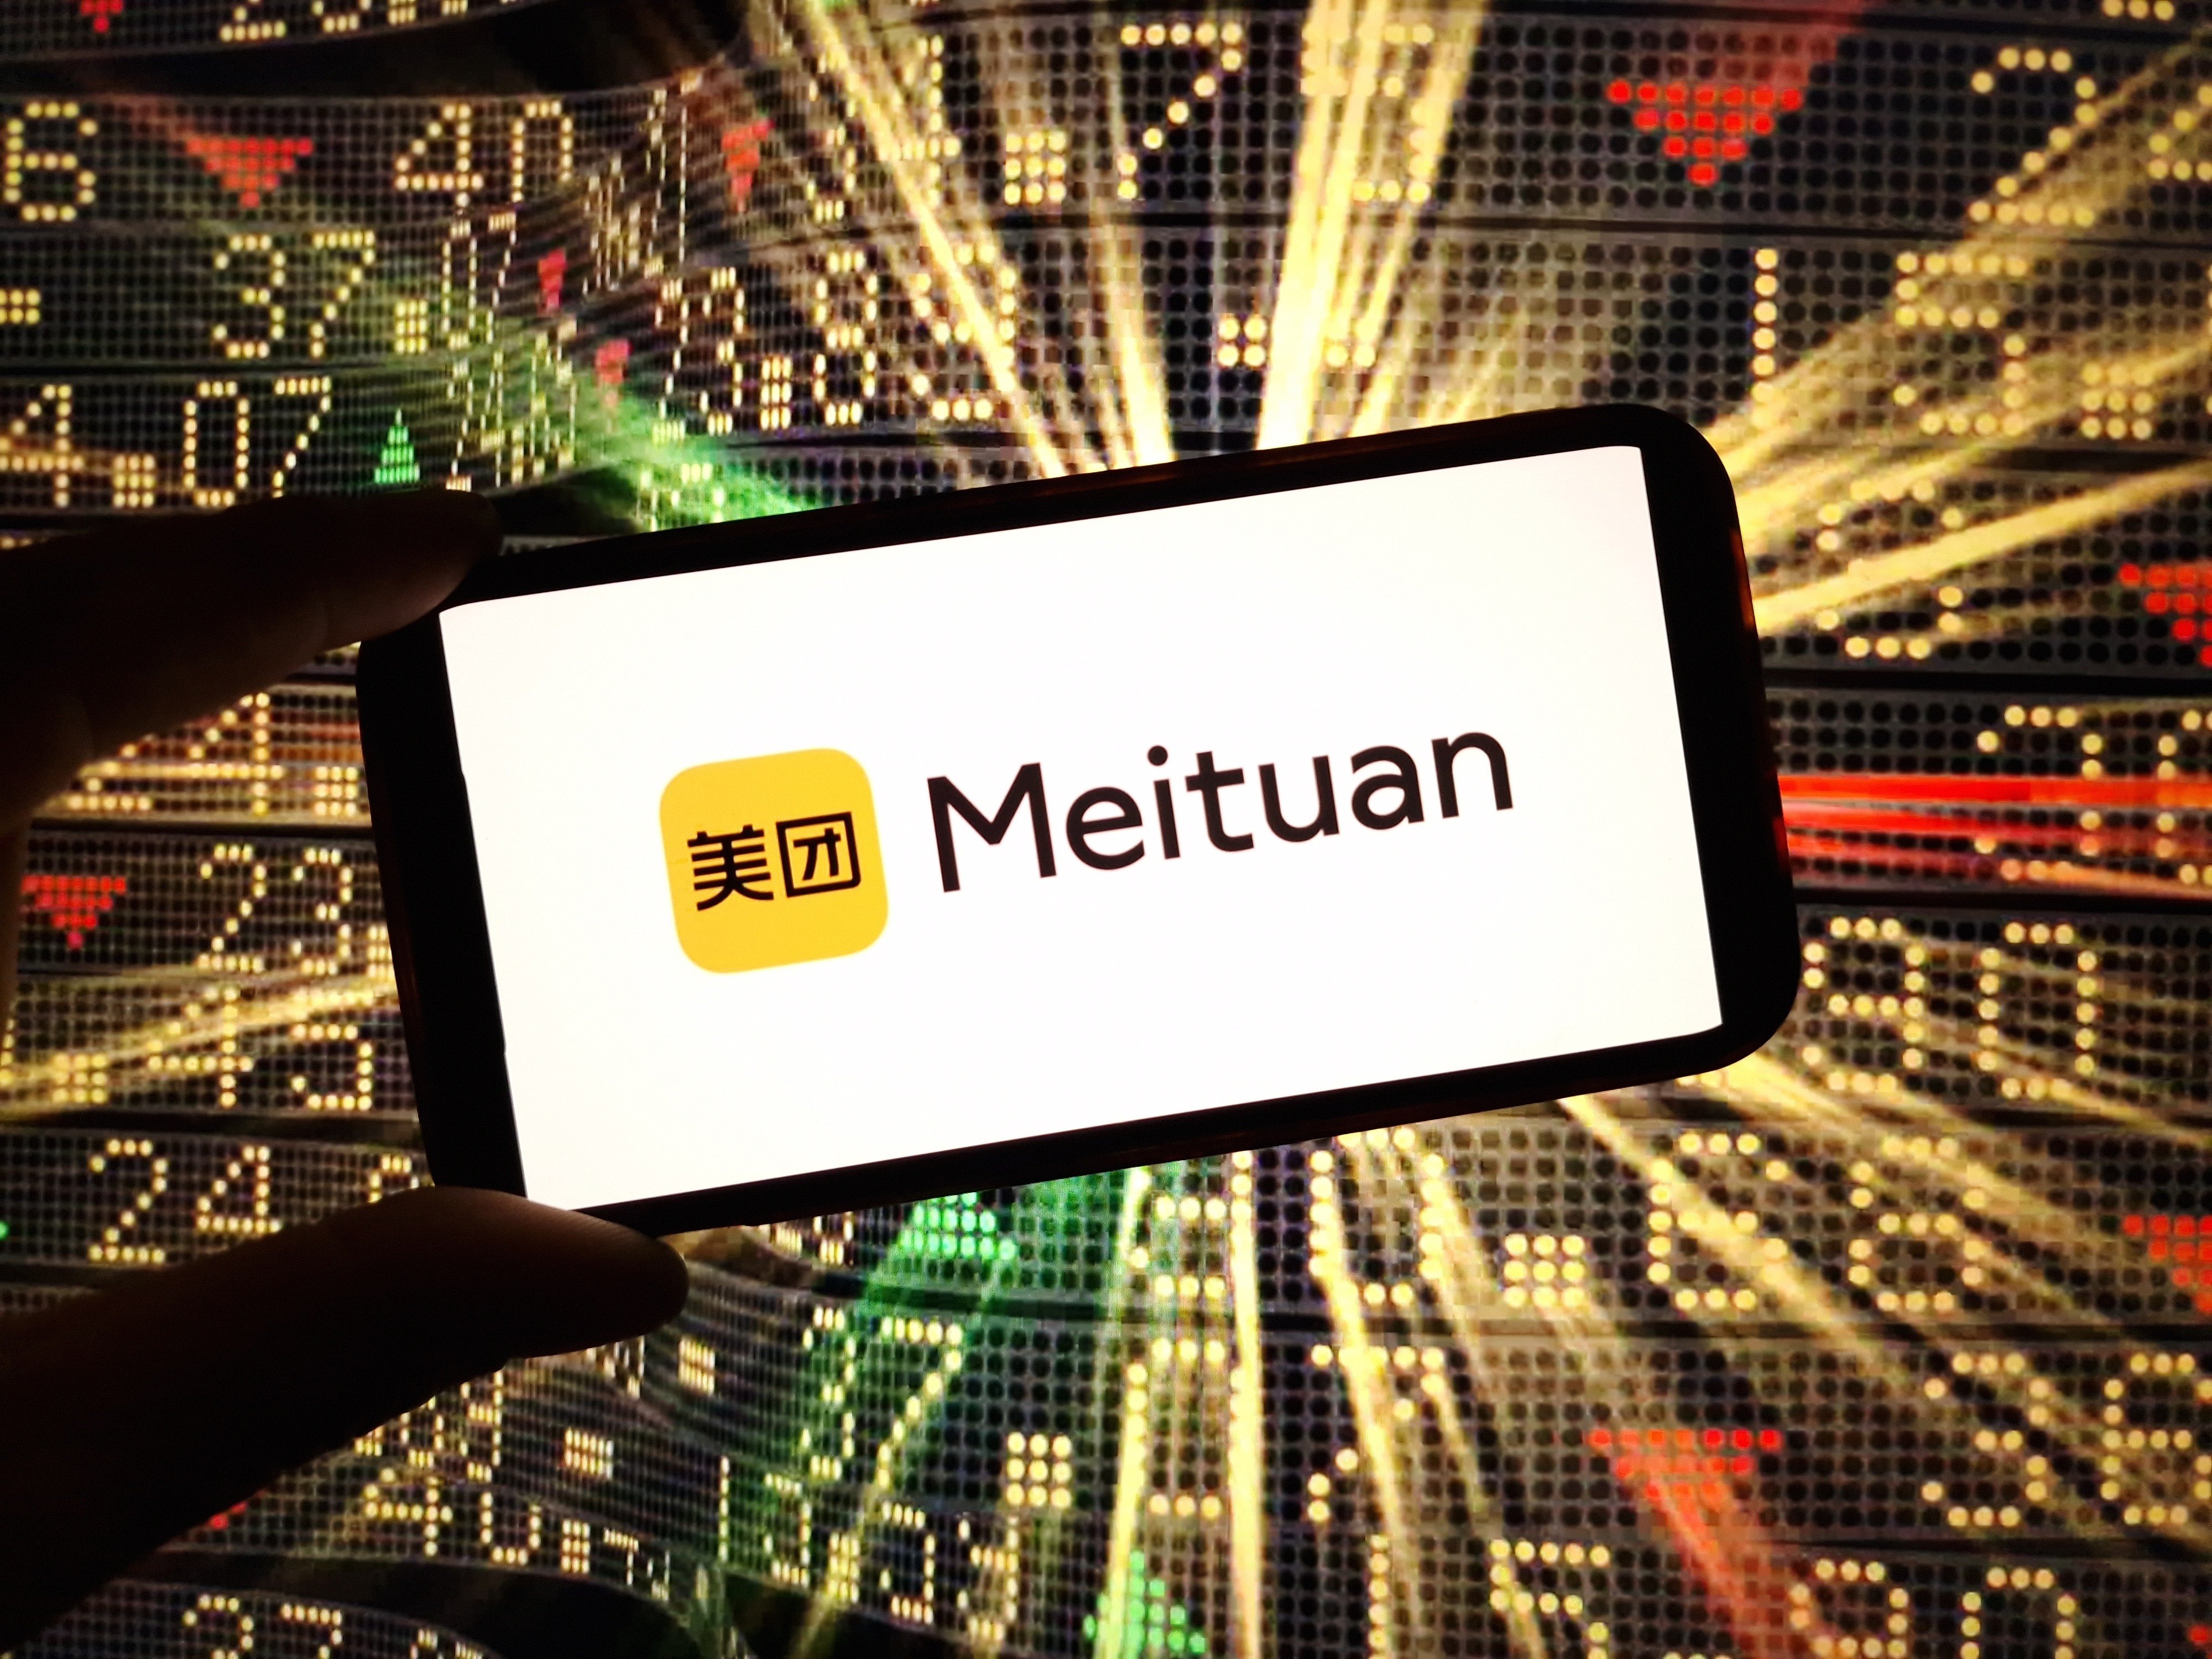 Meituan co-founder and chief executive Wang Xing said the company is looking to expand into more international markets, including in Southeast Asia. Photo: Shutterstock